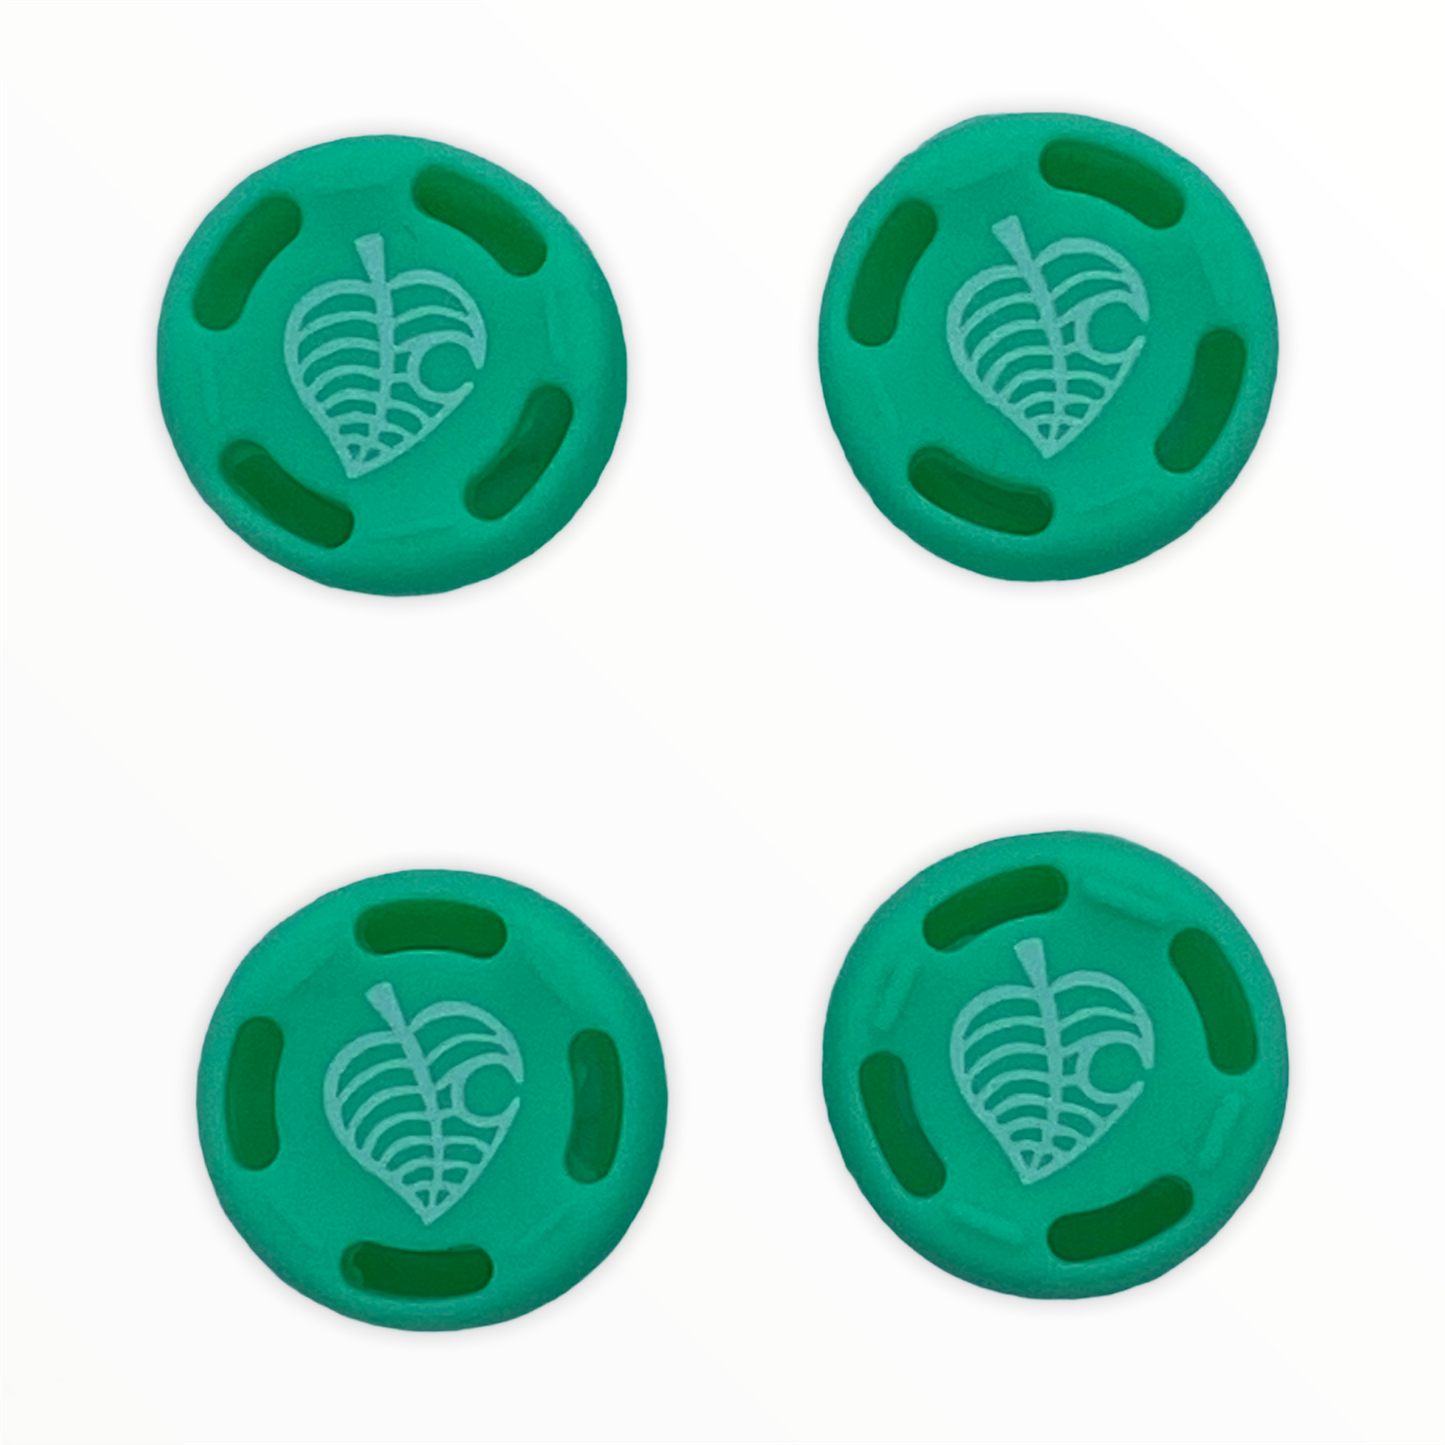 JenDore Green 4Pcs Leaf Animal CrossingSilicone Thumb Grip Caps for Nintendo Switch